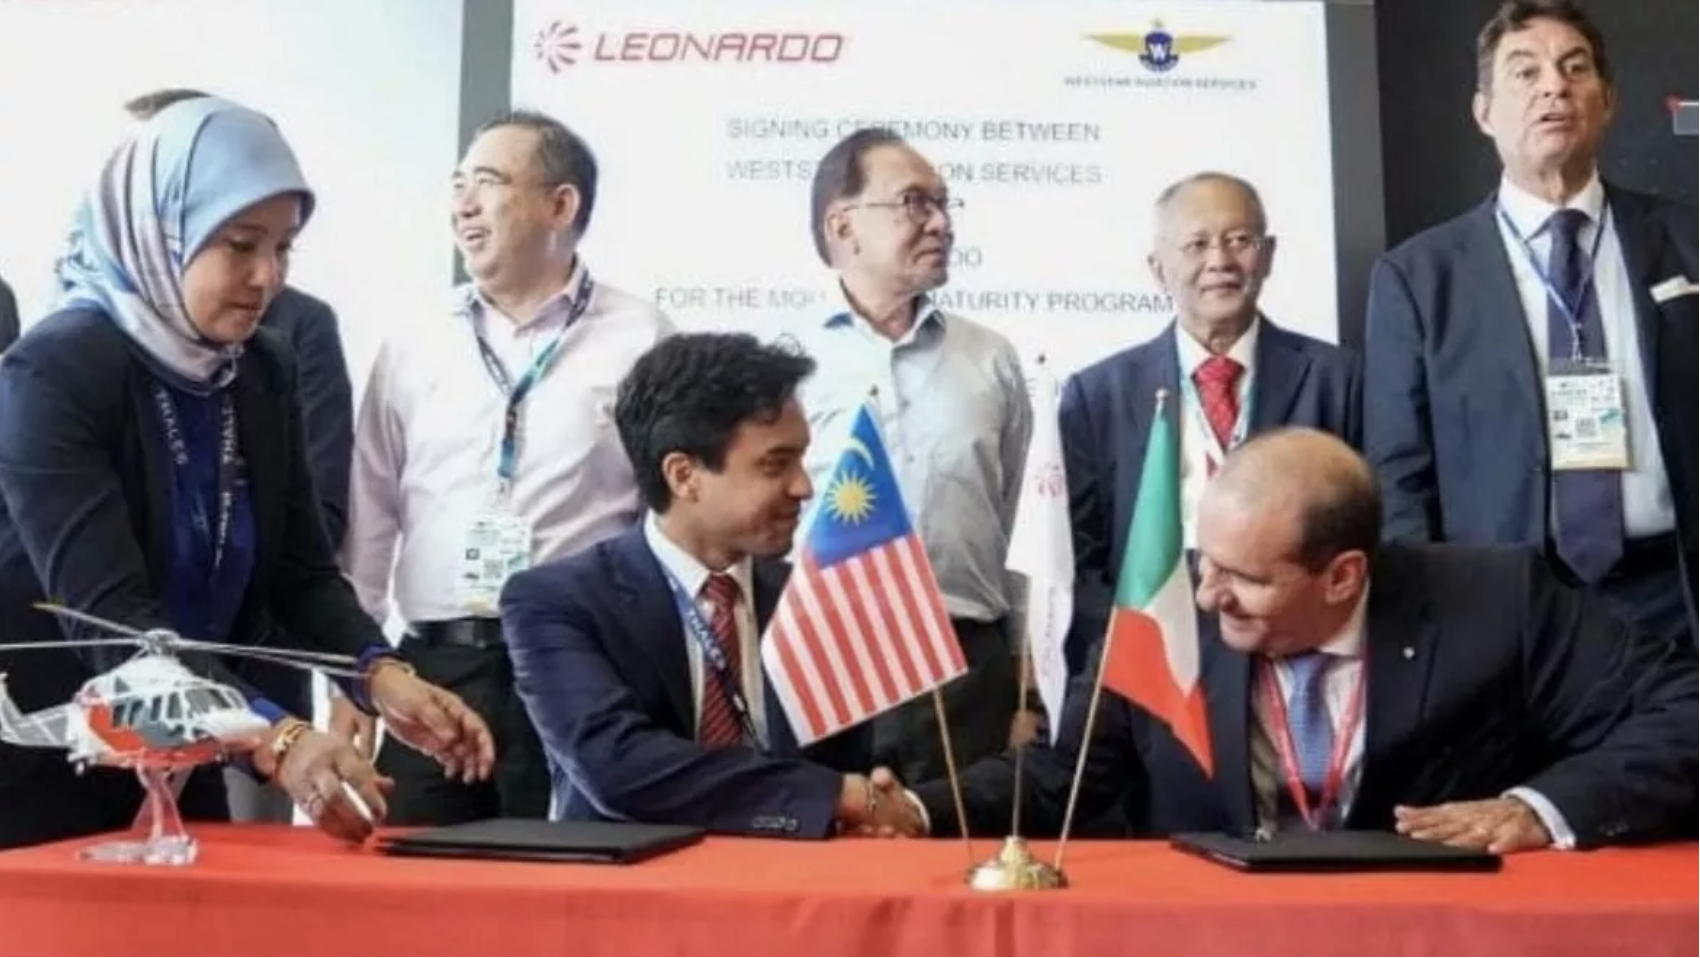 LIMA 2023: Leonardo signs deal with Weststar to sell five AW139 Helicopters